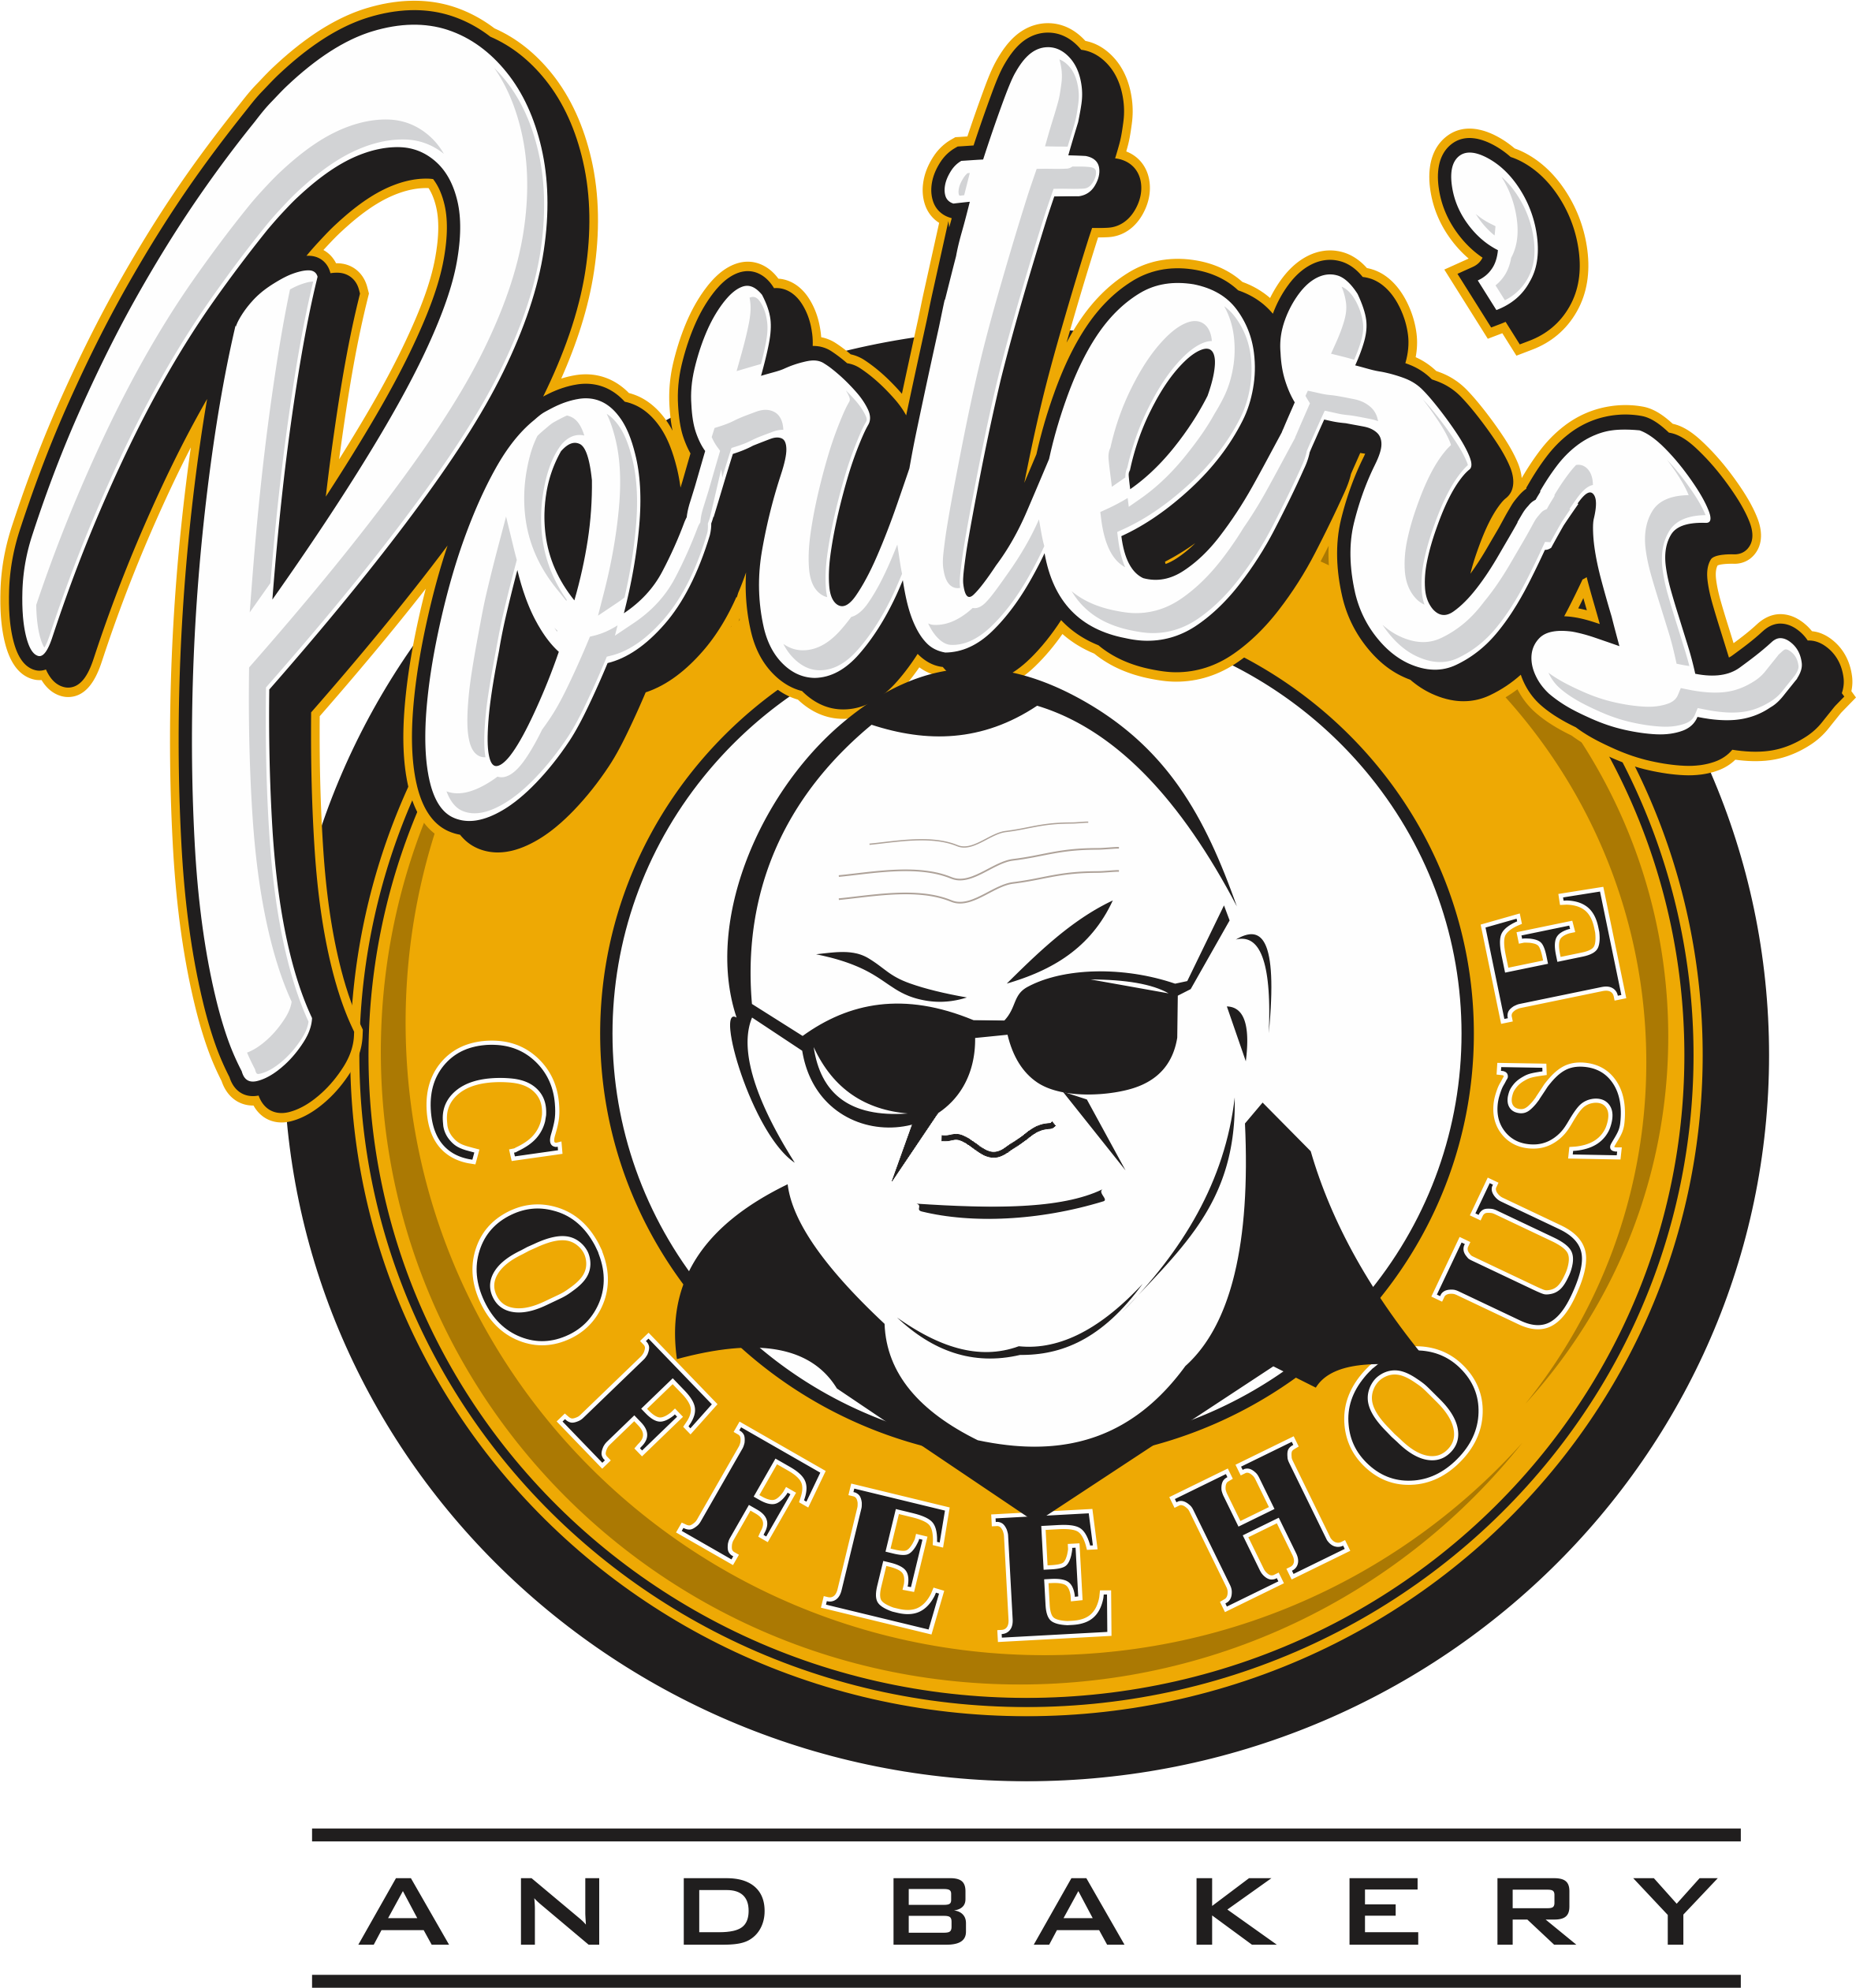 Porters Coffeehouse and Bakery